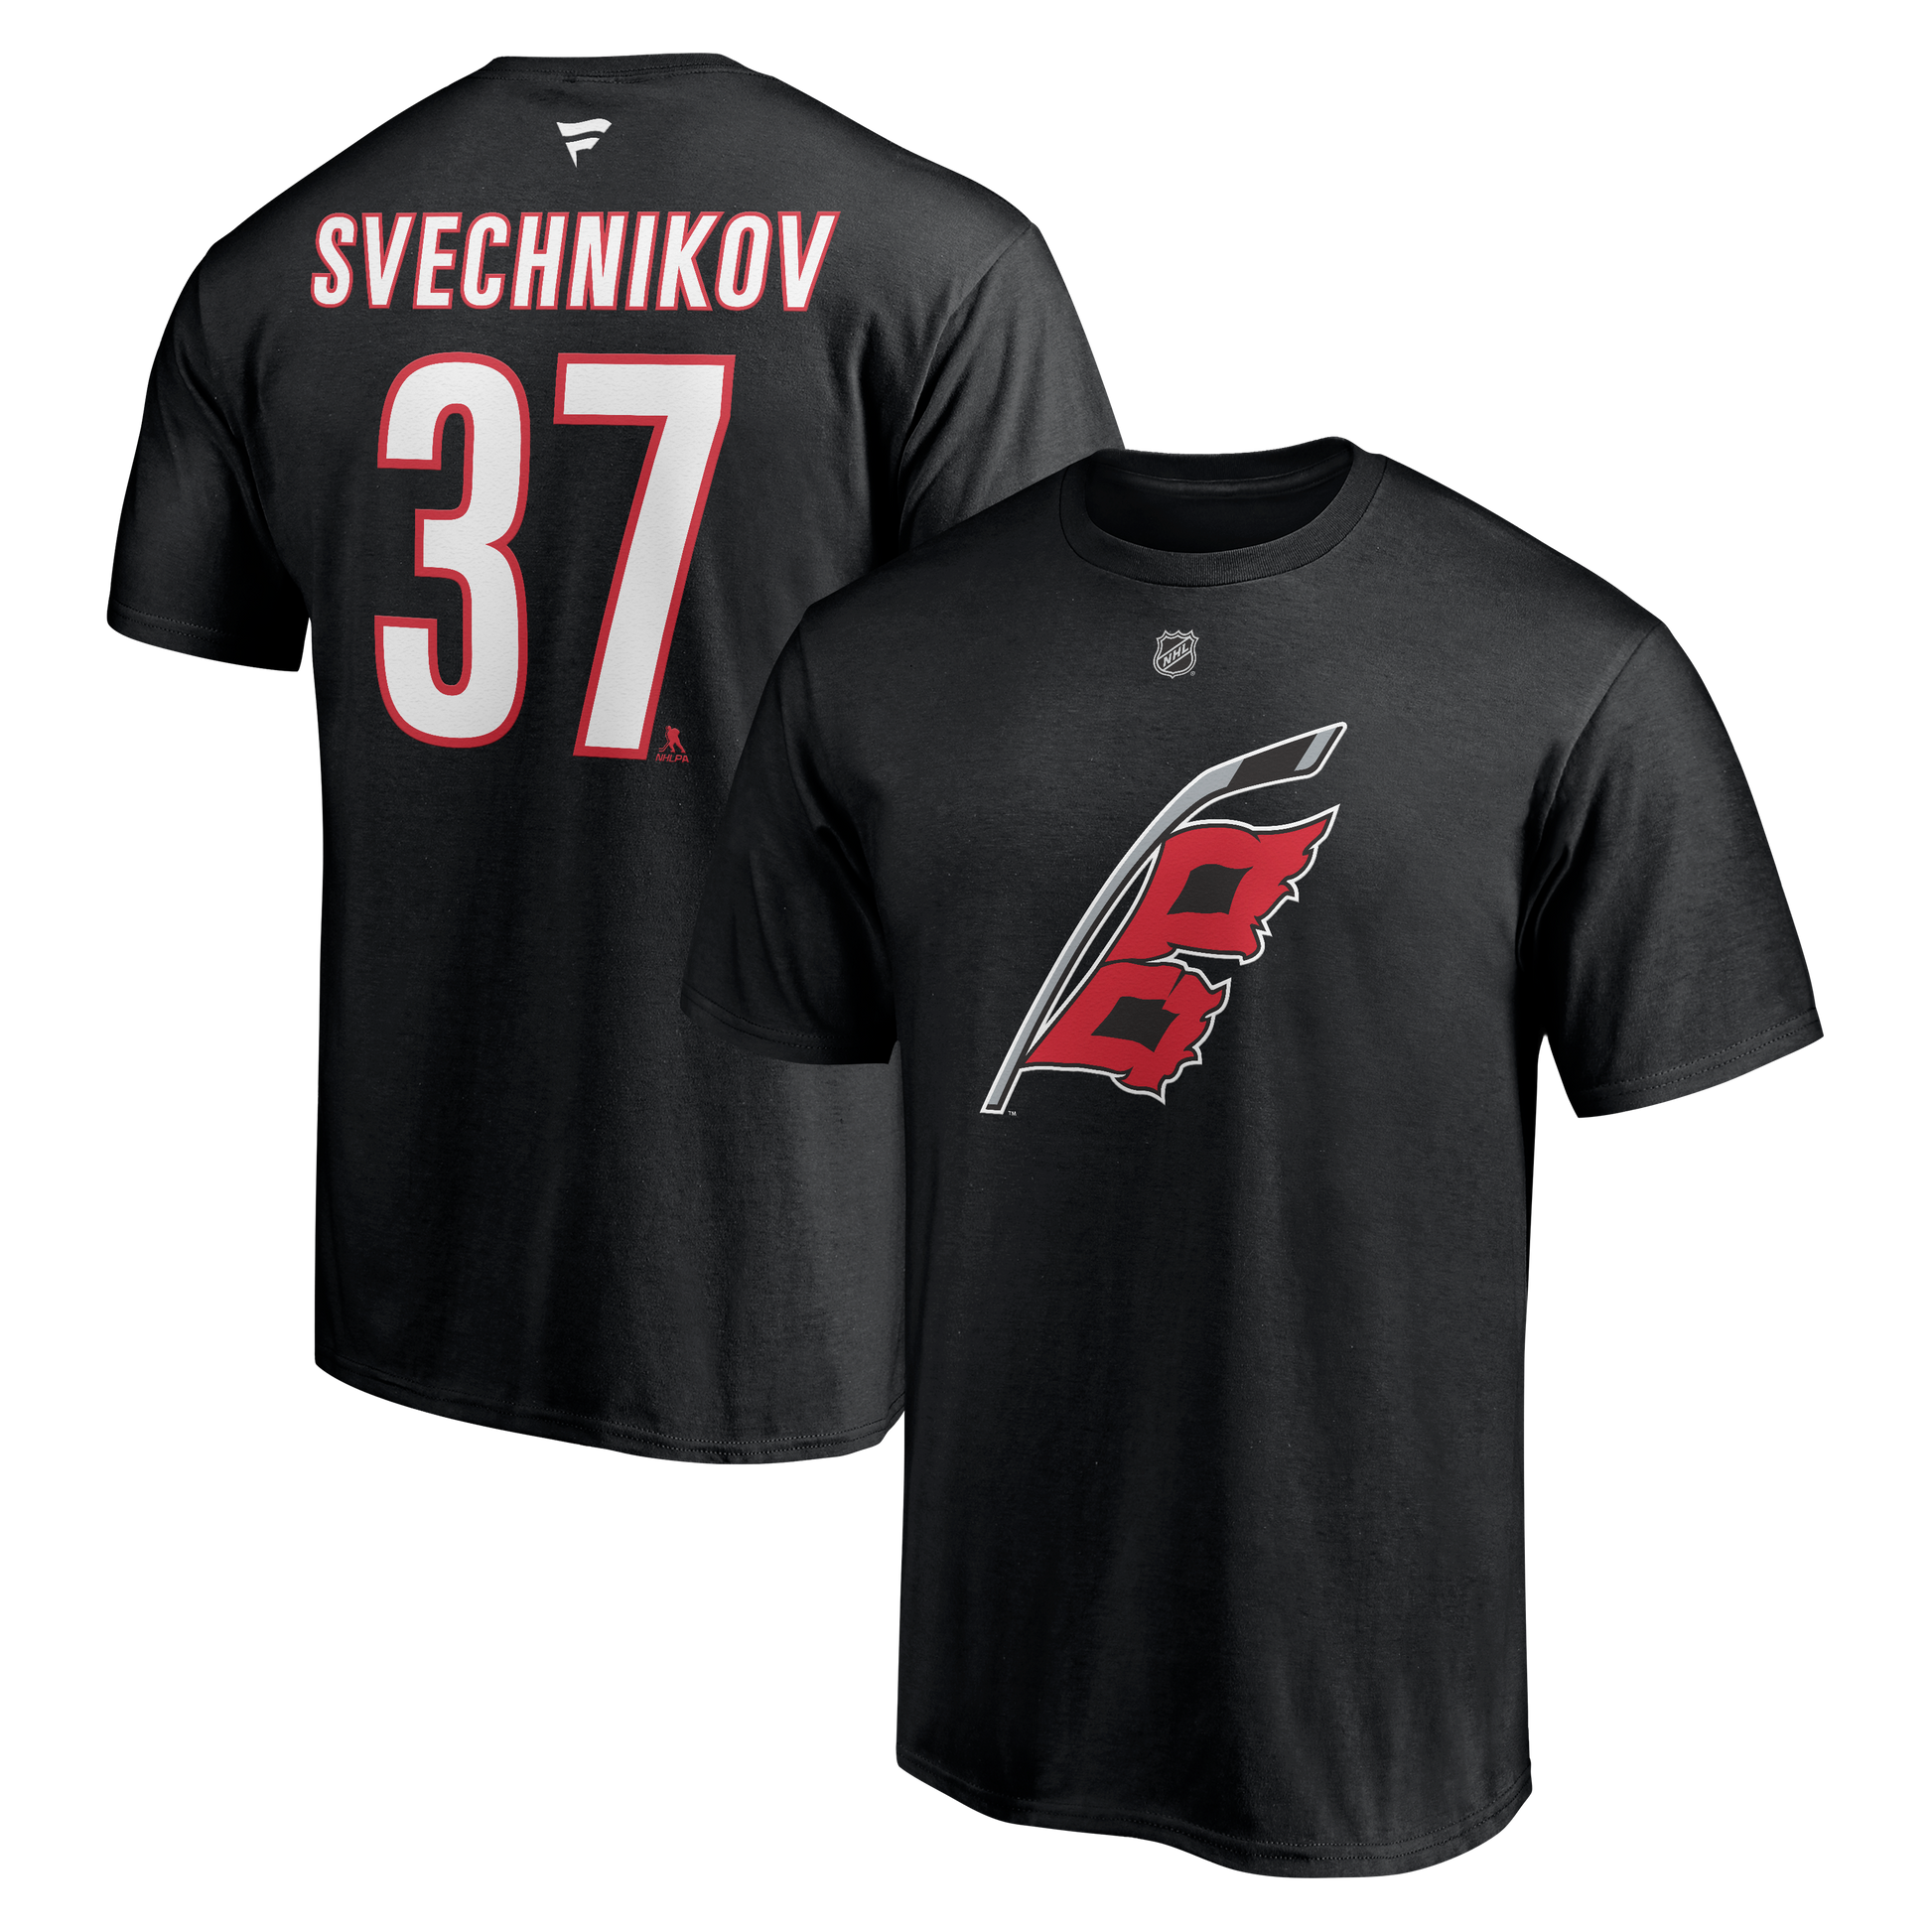 Front and back view of black Svechnikov player tee